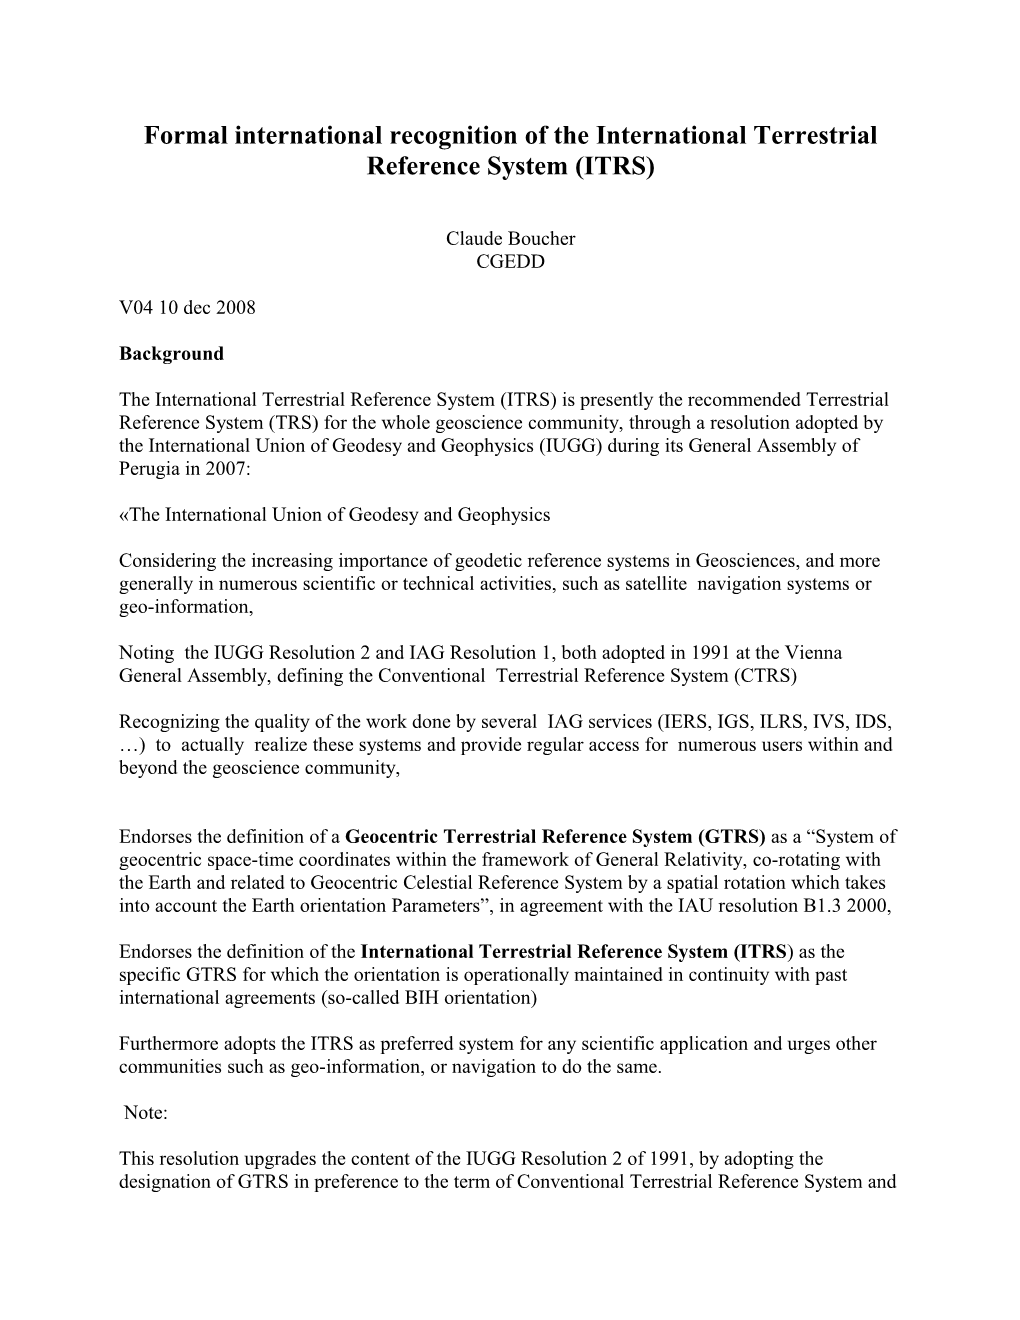 Formal International Recognition of the International Terrestrial Reference System (ITRS)